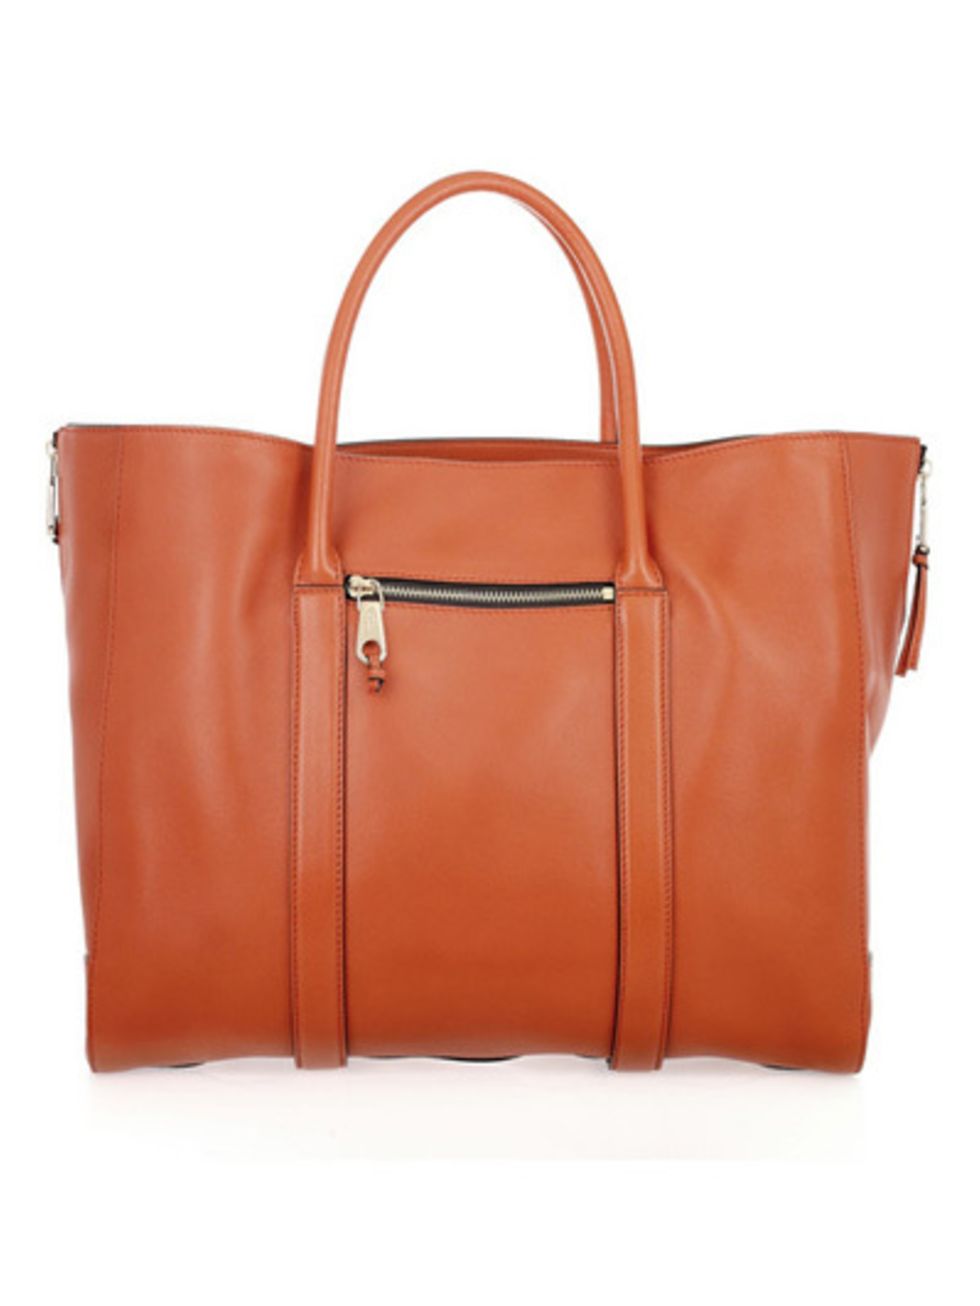 Product, Brown, Bag, Orange, Red, White, Style, Amber, Luggage and bags, Tan, 